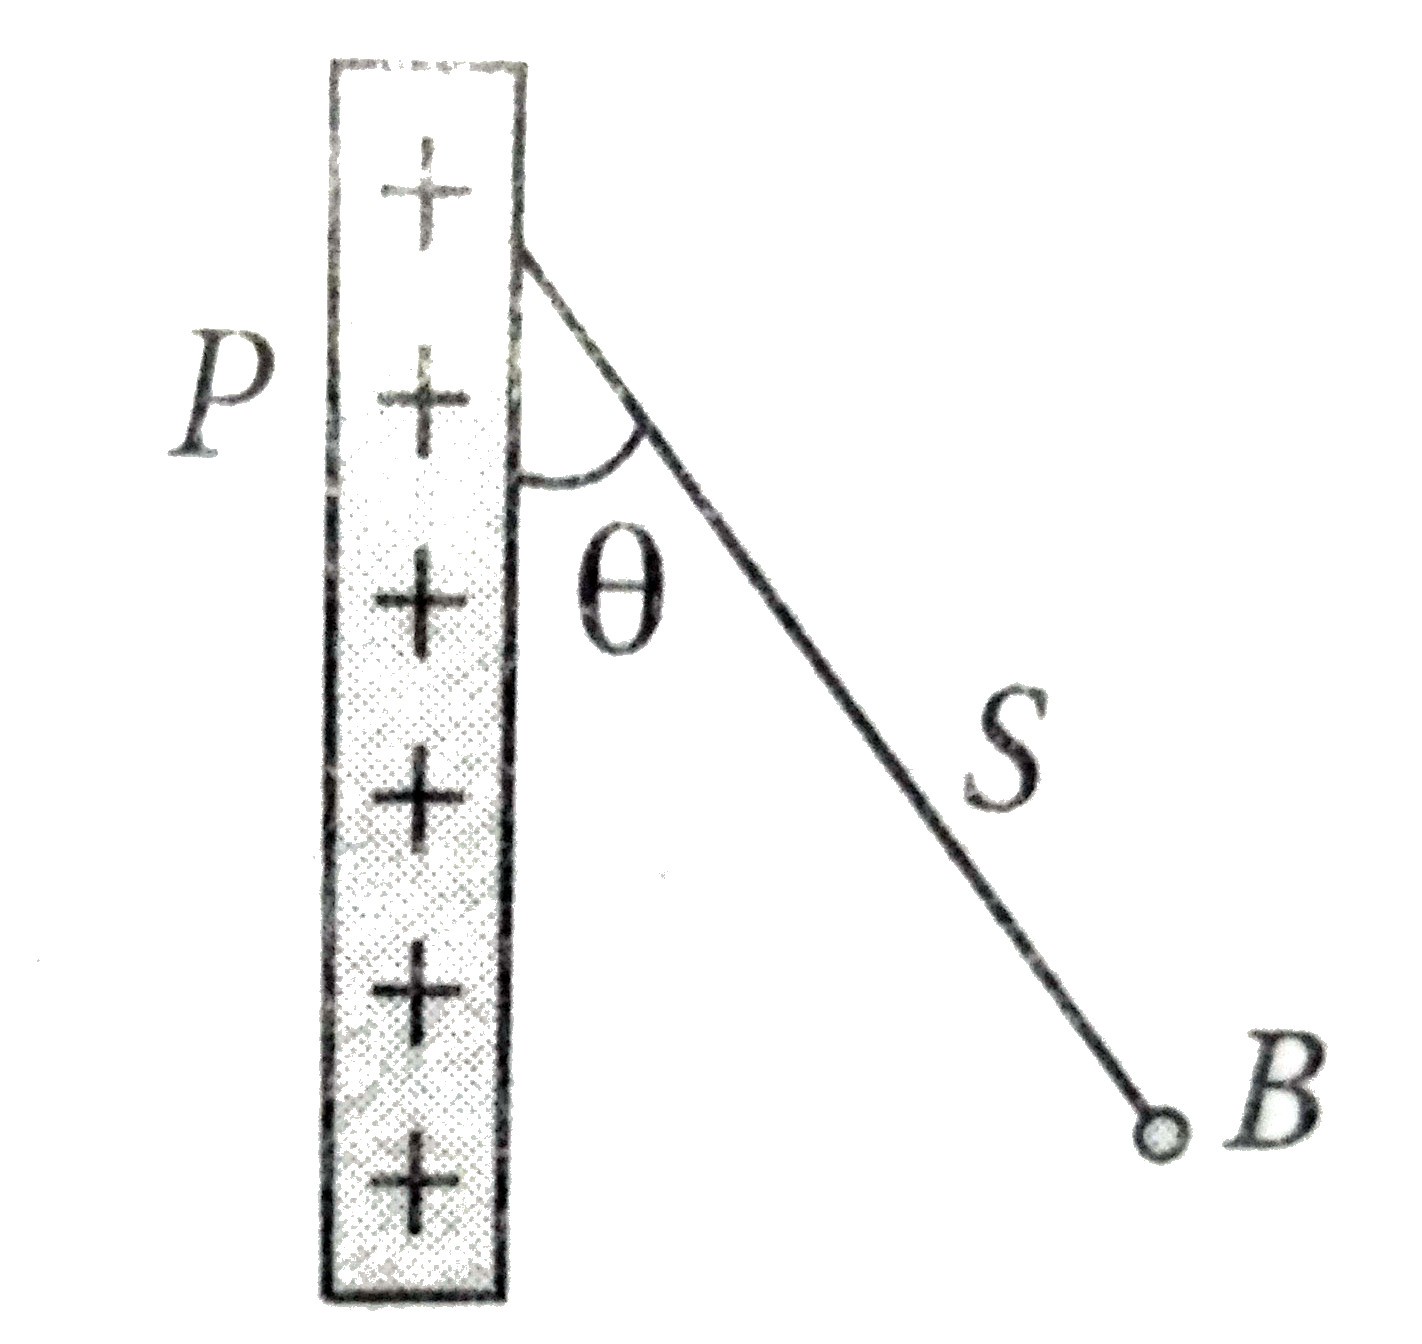 A charged ball B hangs from a silk thread S, which makes an angle theta with a large charged conducting sheet P as shown in the figure. The surface charge density of the sheet is proportional to